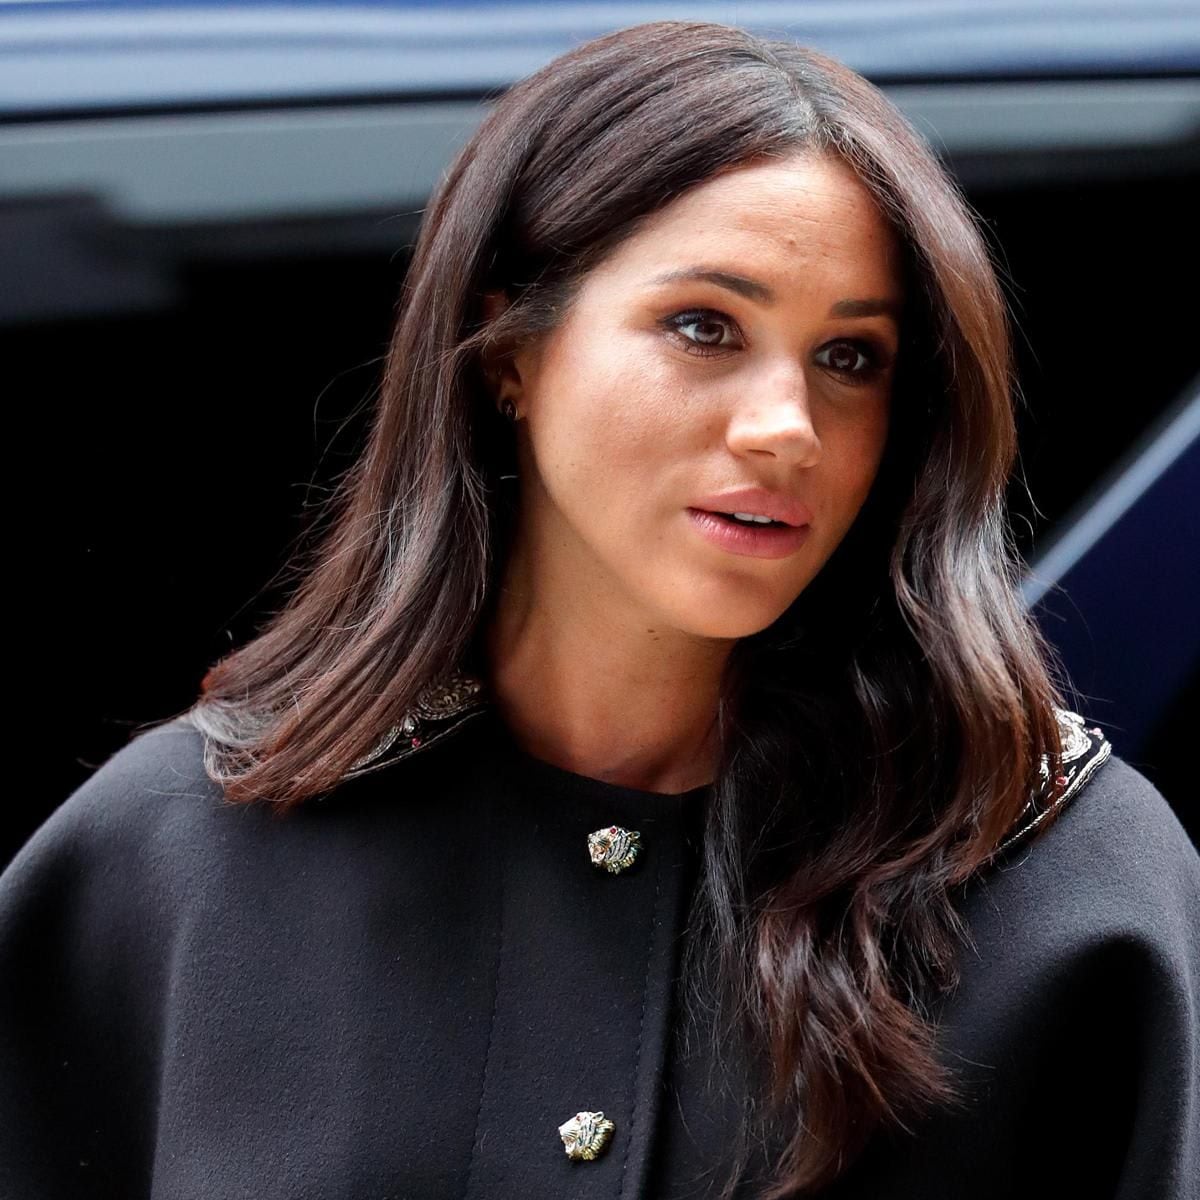 Netflix has dropped Meghan Markle’s animated series ‘Pearl’